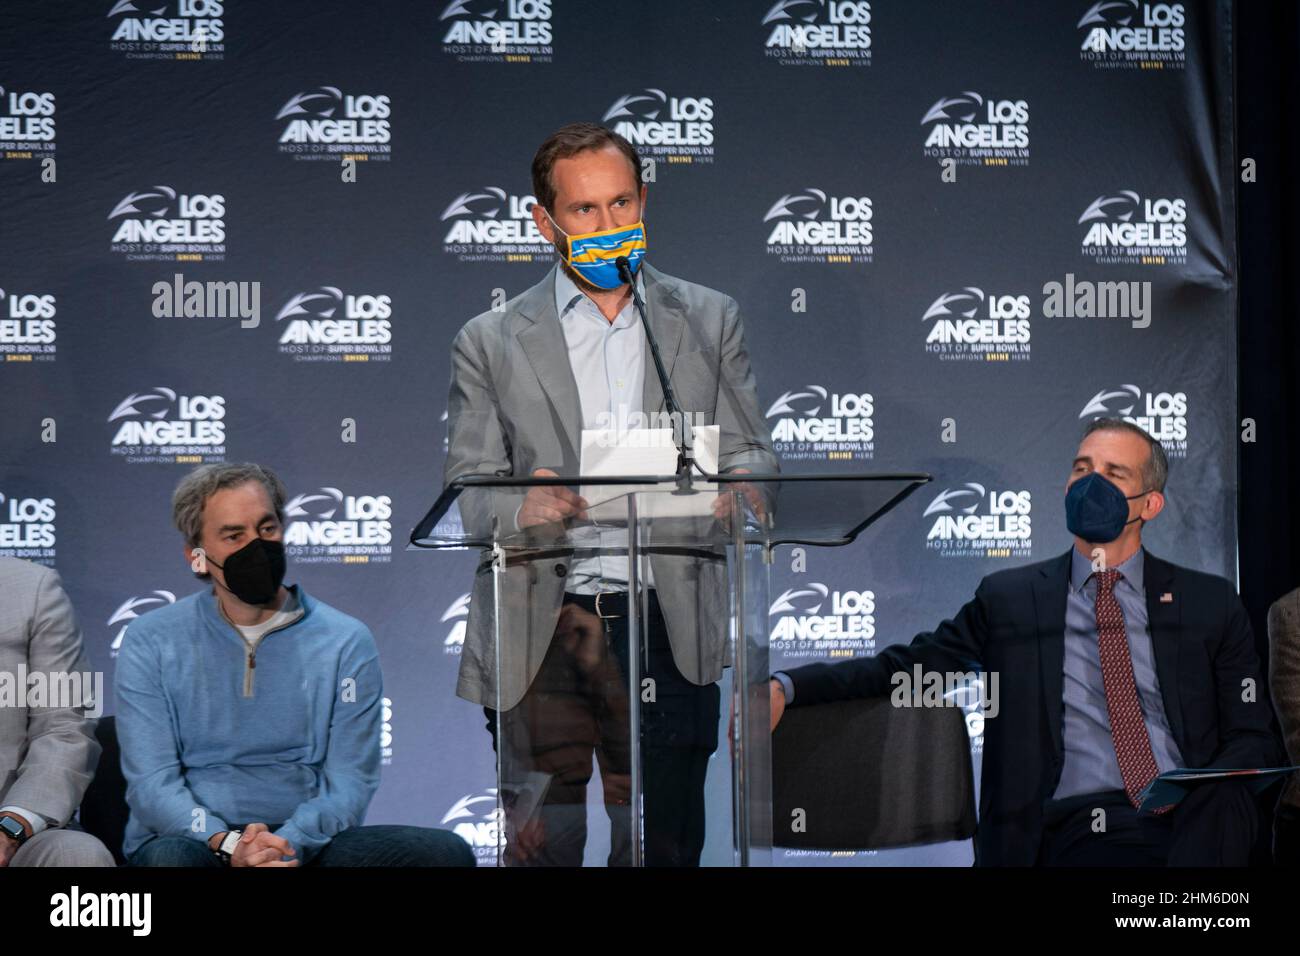 A.G. Spanos, President of Business Operations, Los Angeles Chargers, speaks during a NFL Super Bowl LVI welcome press conference, Monday, Feb. 7, 2022 Stock Photo